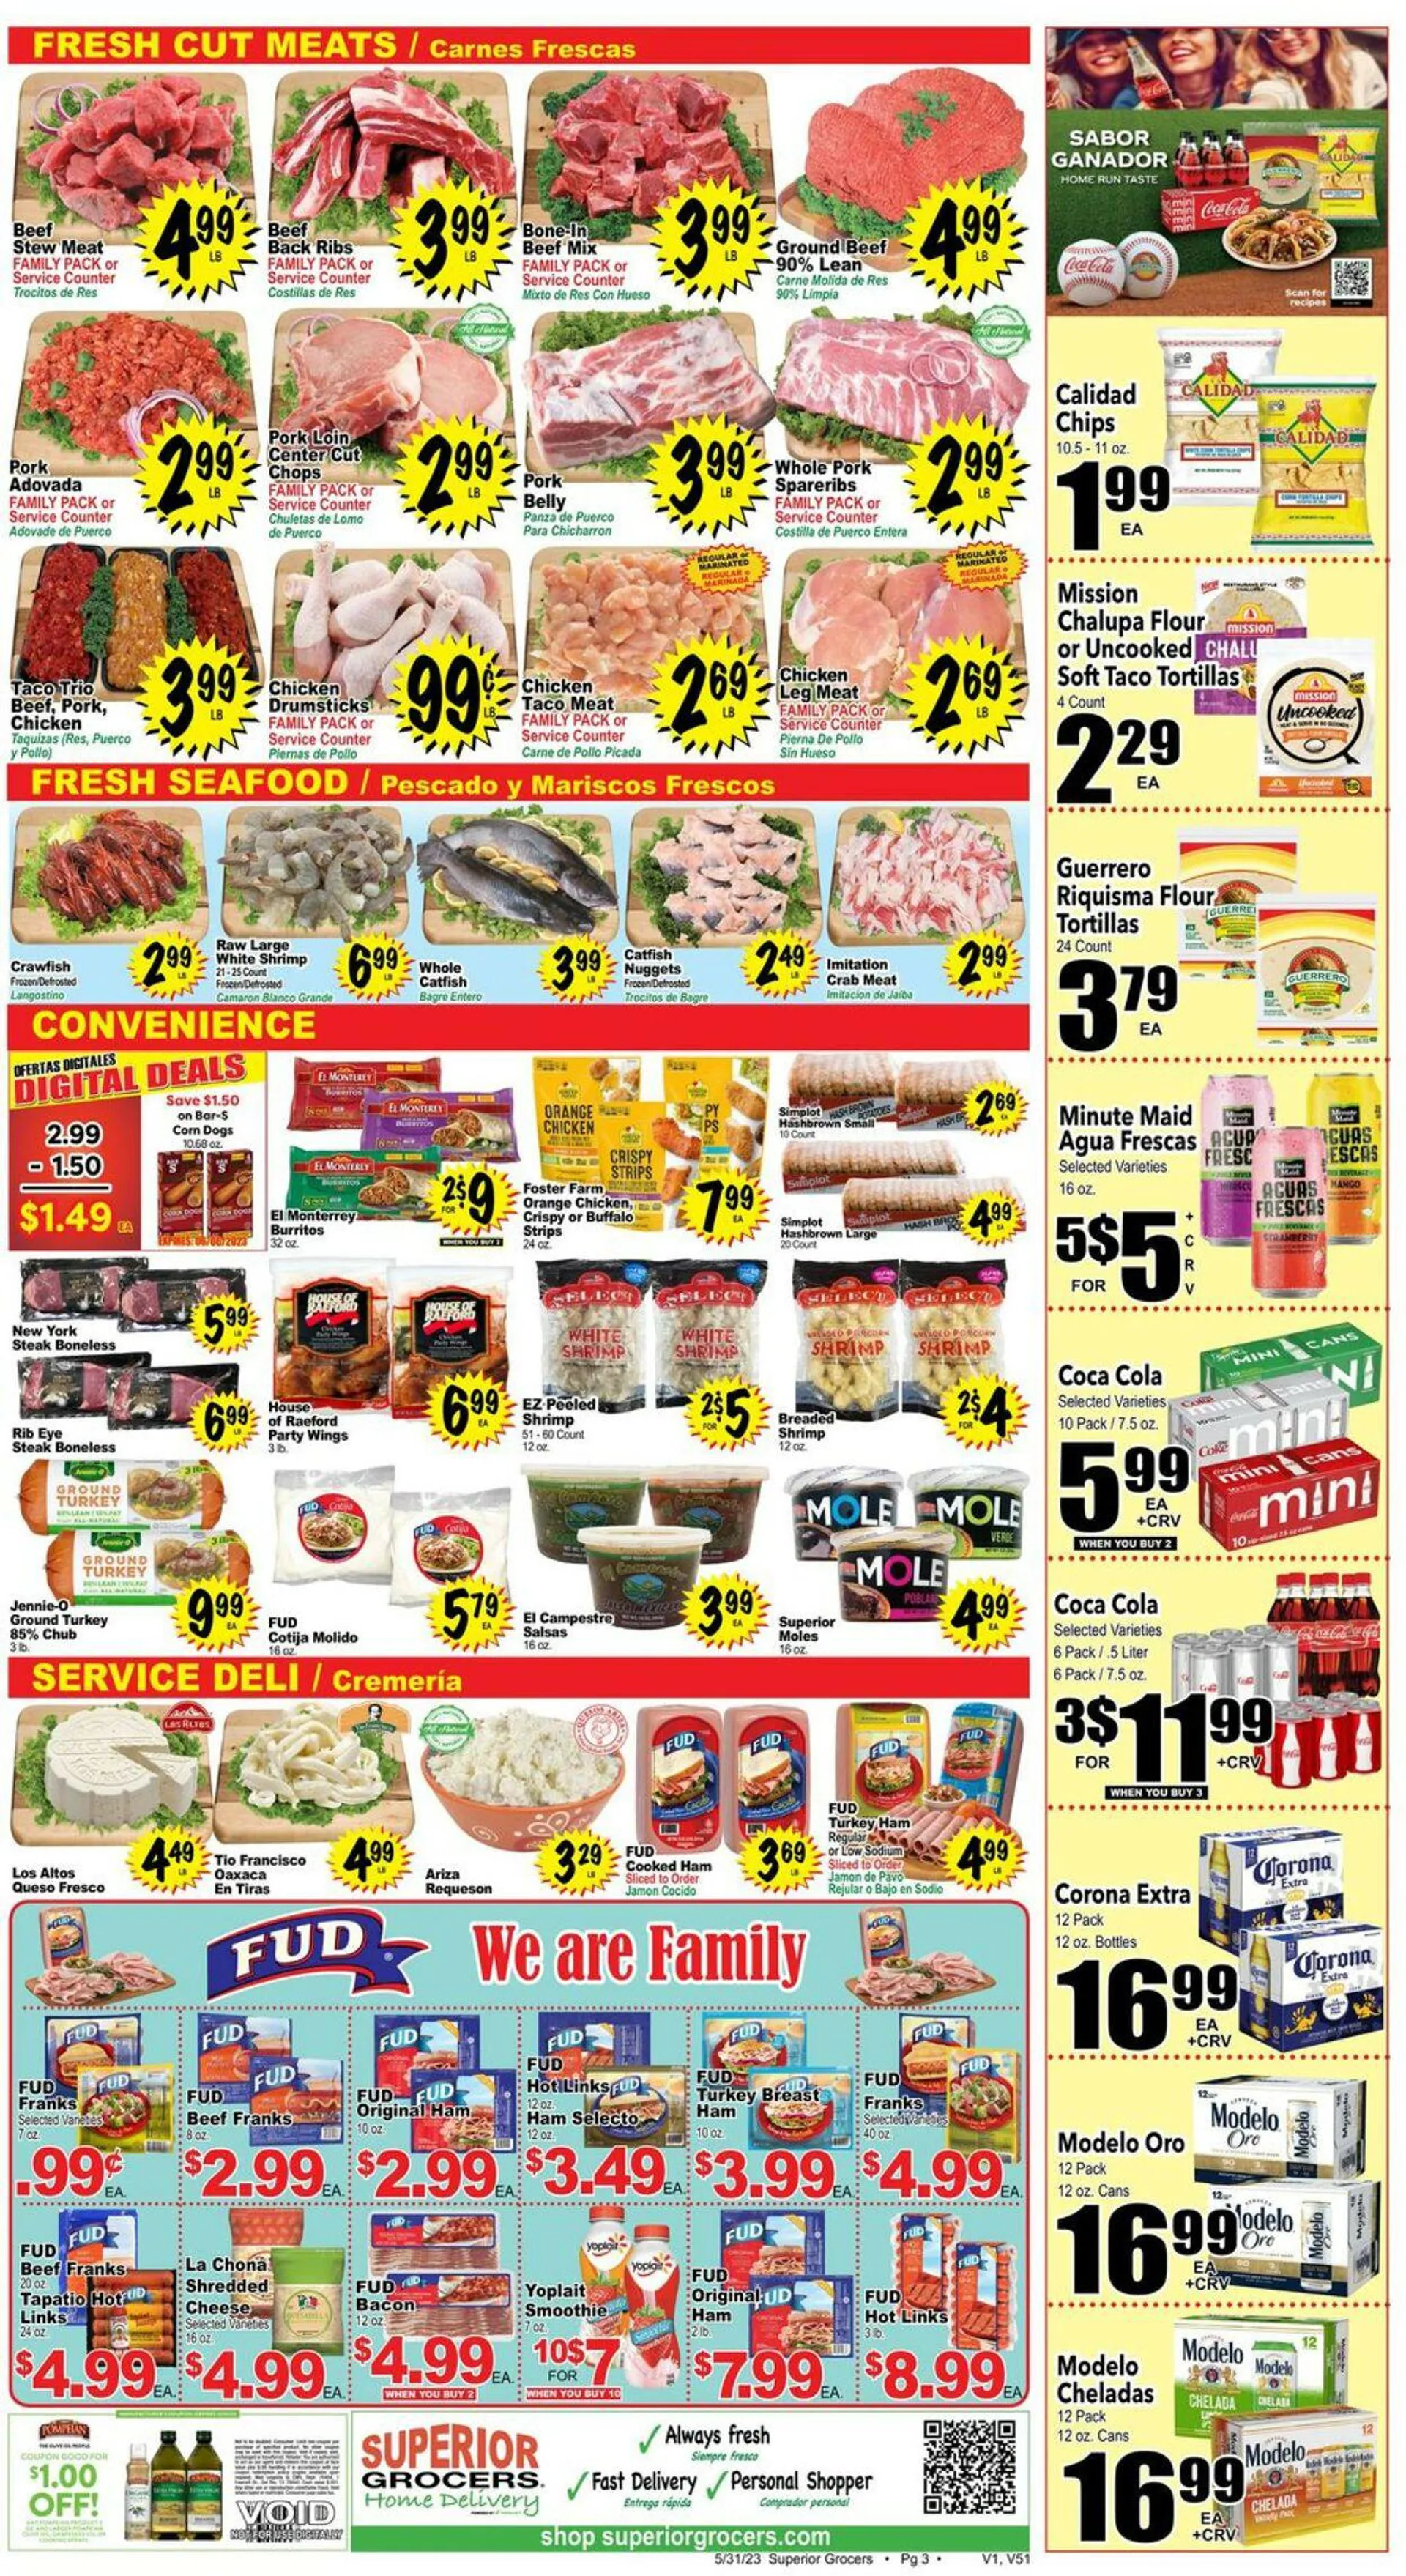 Superior Grocers Current weekly ad - 3